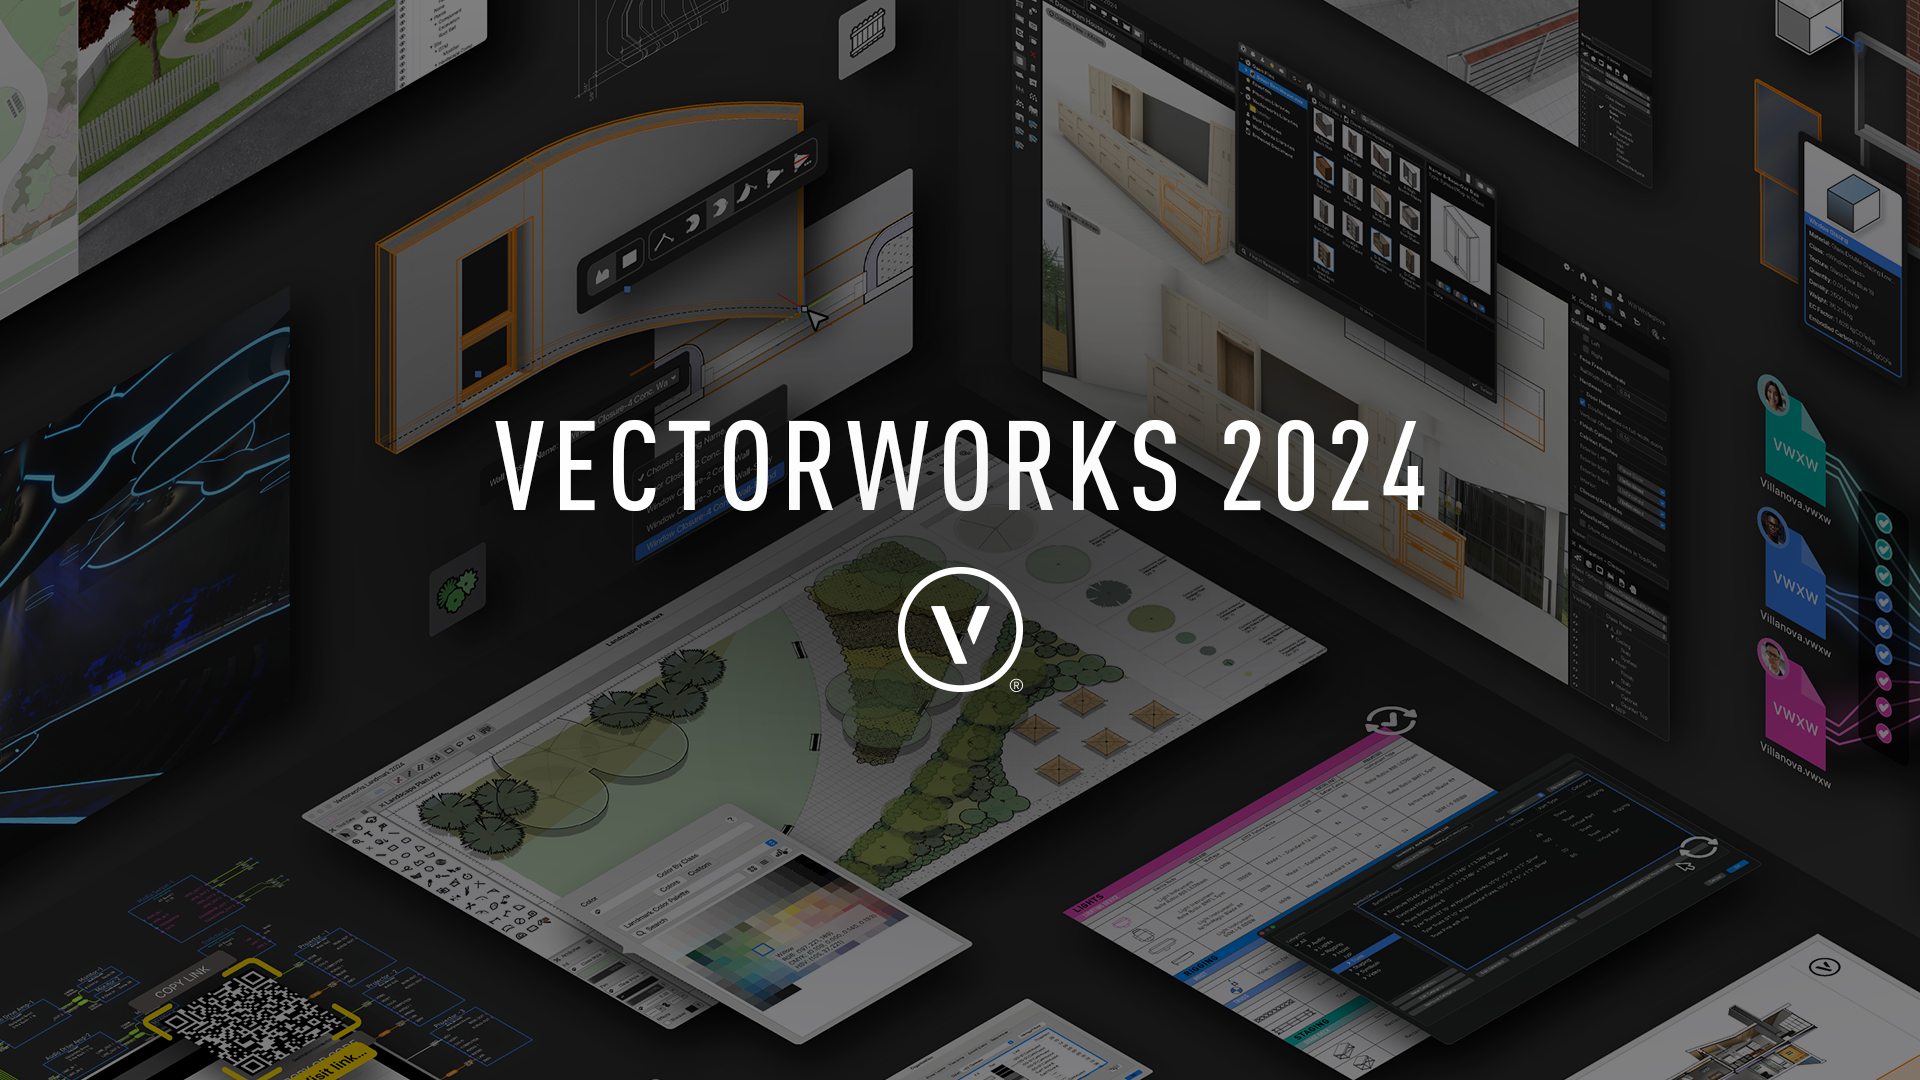 Vectorworks 2024 to Unleash Limitless Creativity for Designers